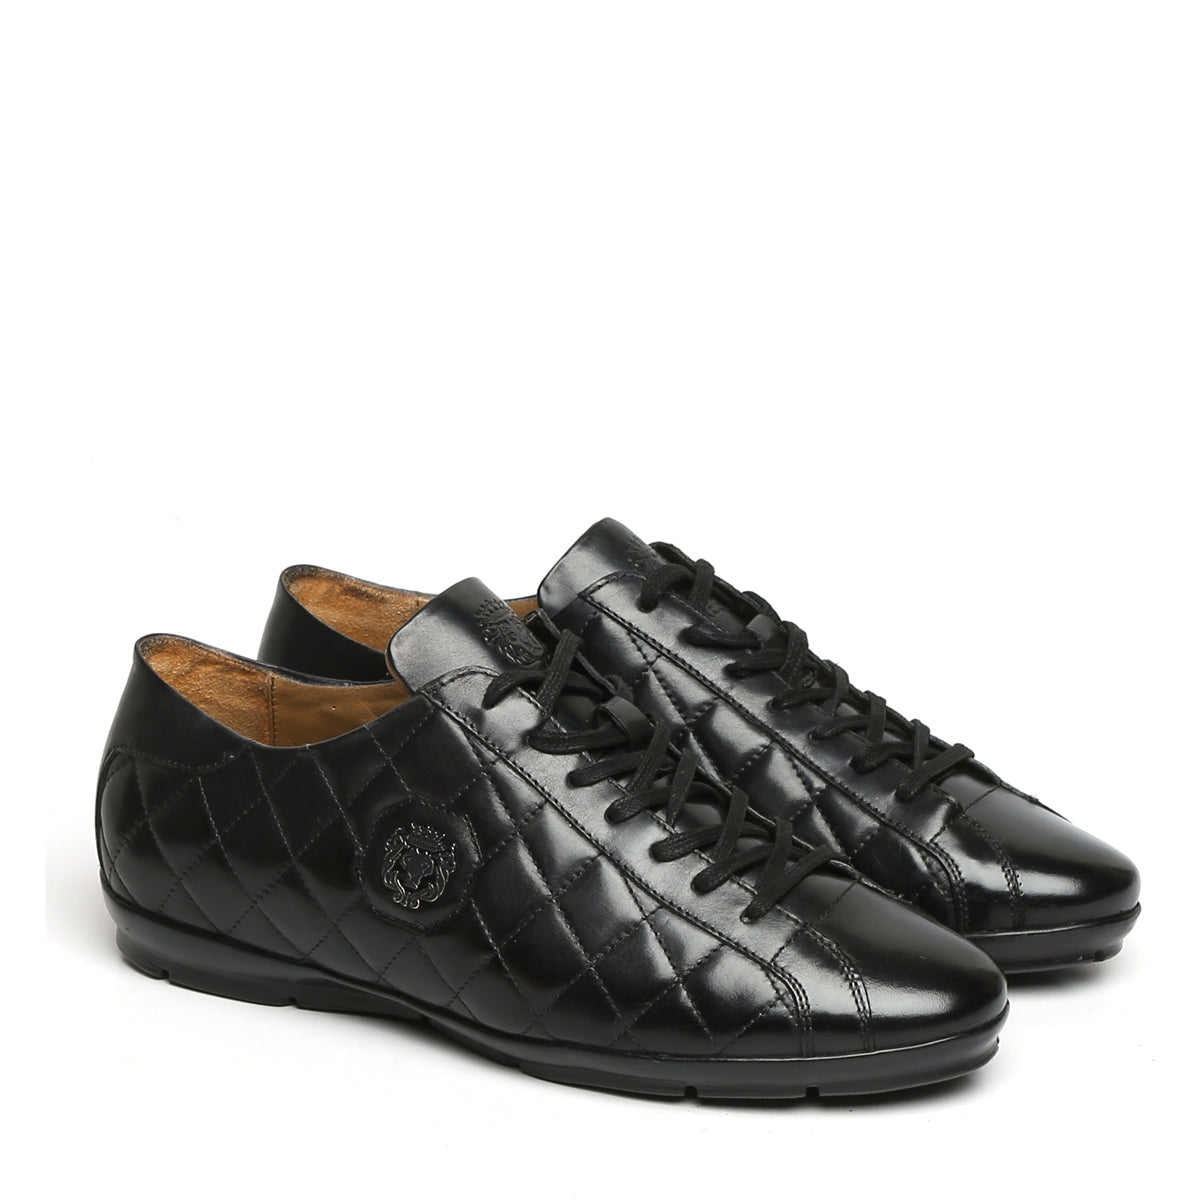 Black Diamond Stitched Leather Sneakers With Metal Lion Lace-Up Closure